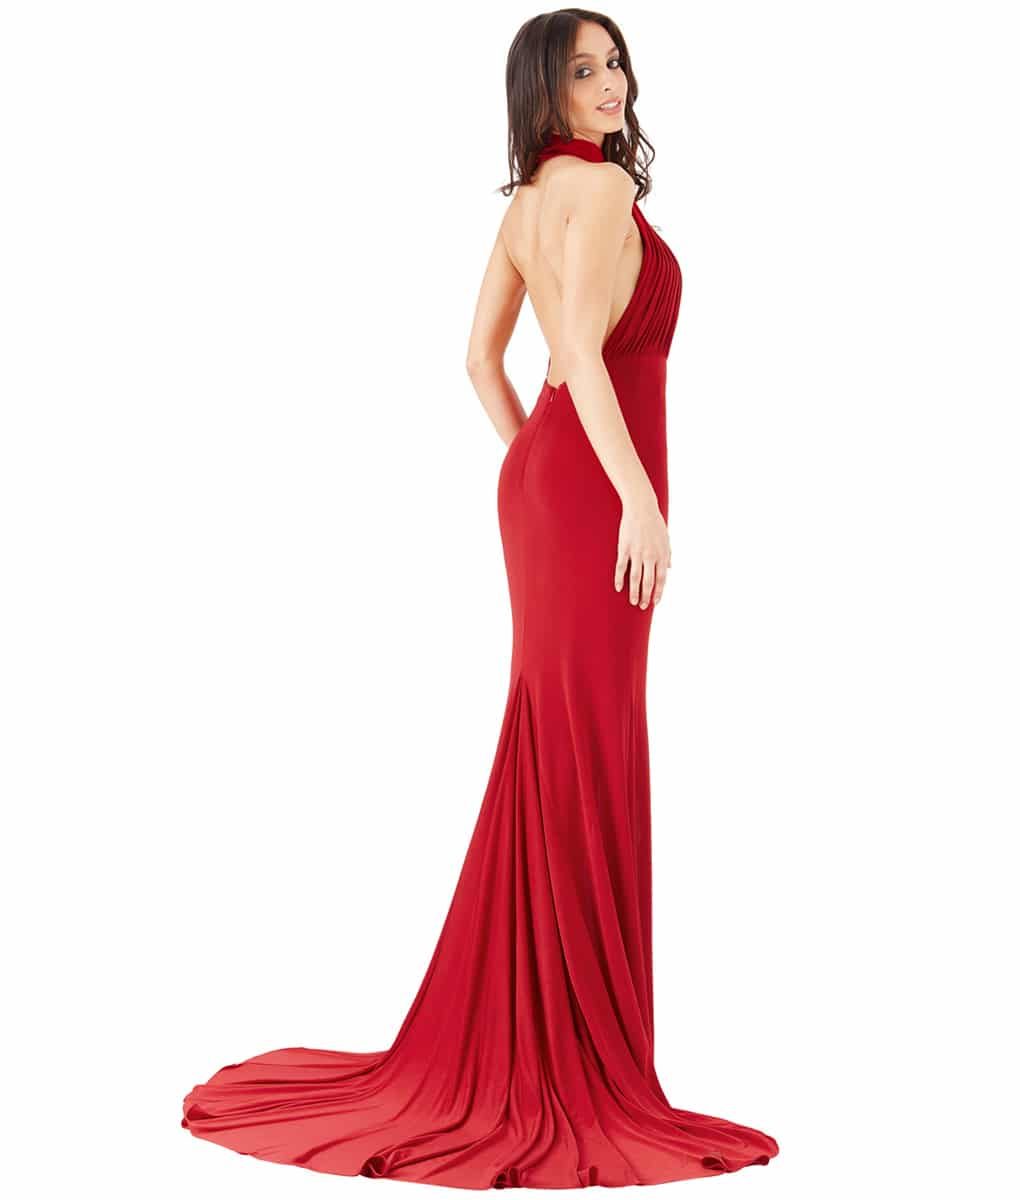 Alila Boutique Red Halter Neck Gown